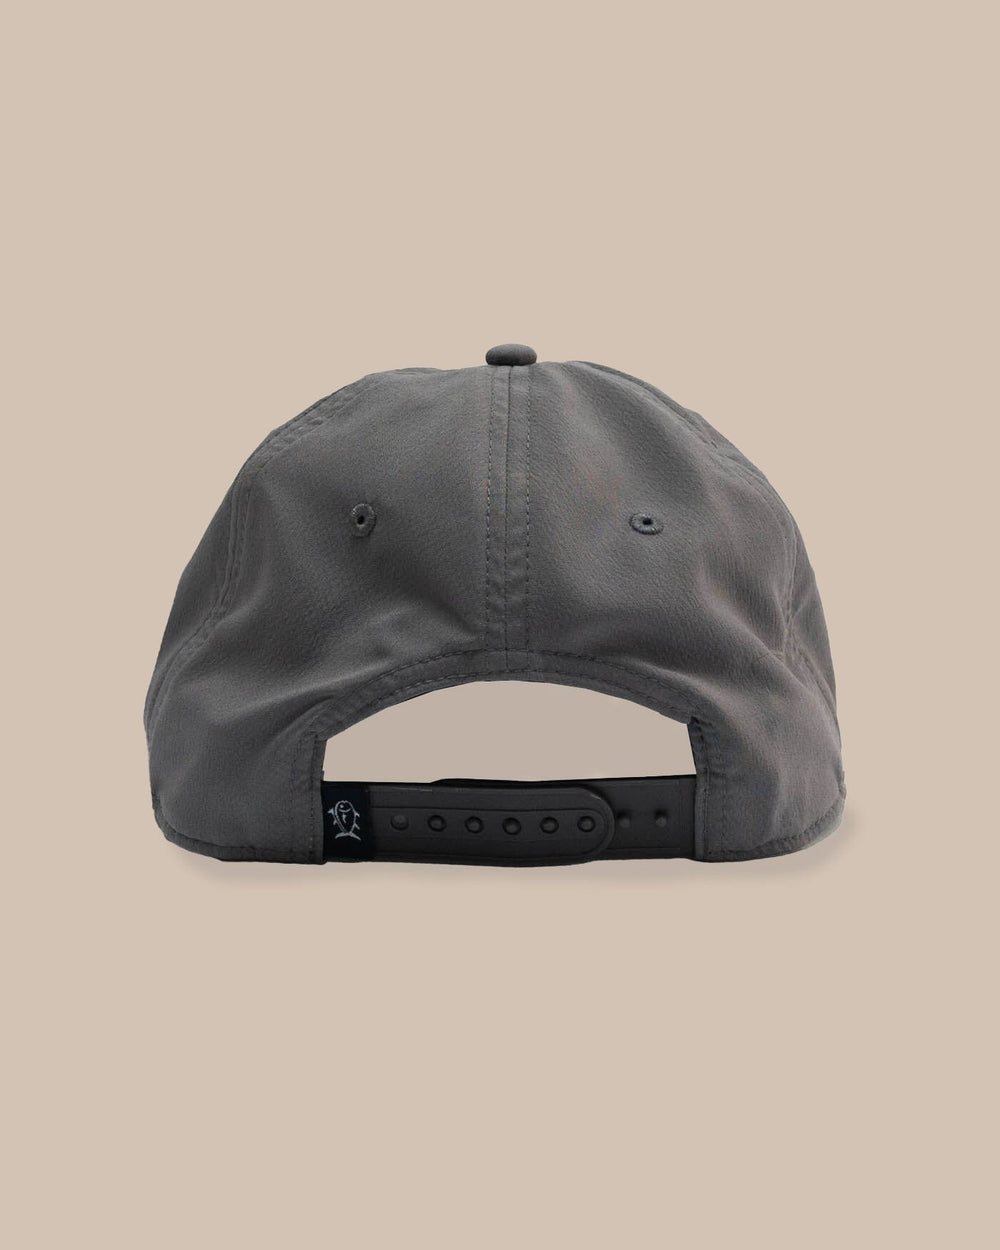 The back view of the Southern Tide Southern Tide Sunset Gradient 5 Panel Hat by Southern Tide - Grey